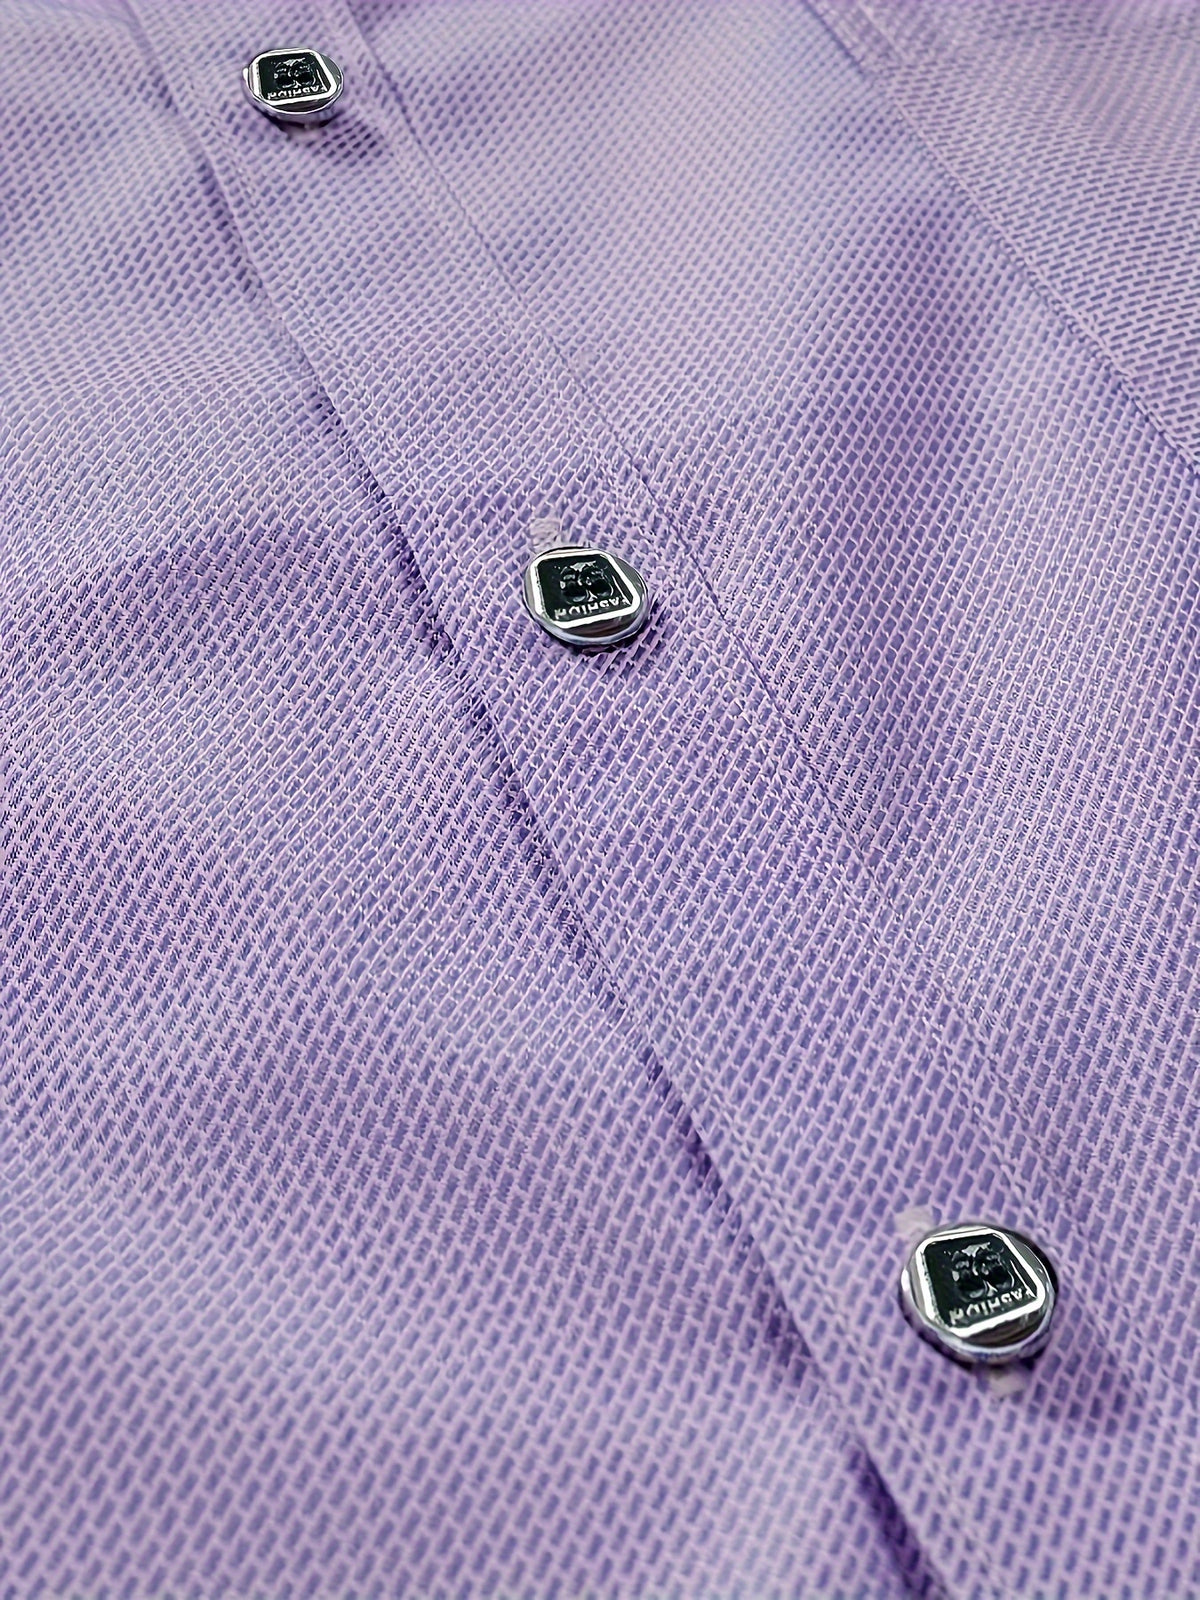 a close up of a dress shirt with buttons on it